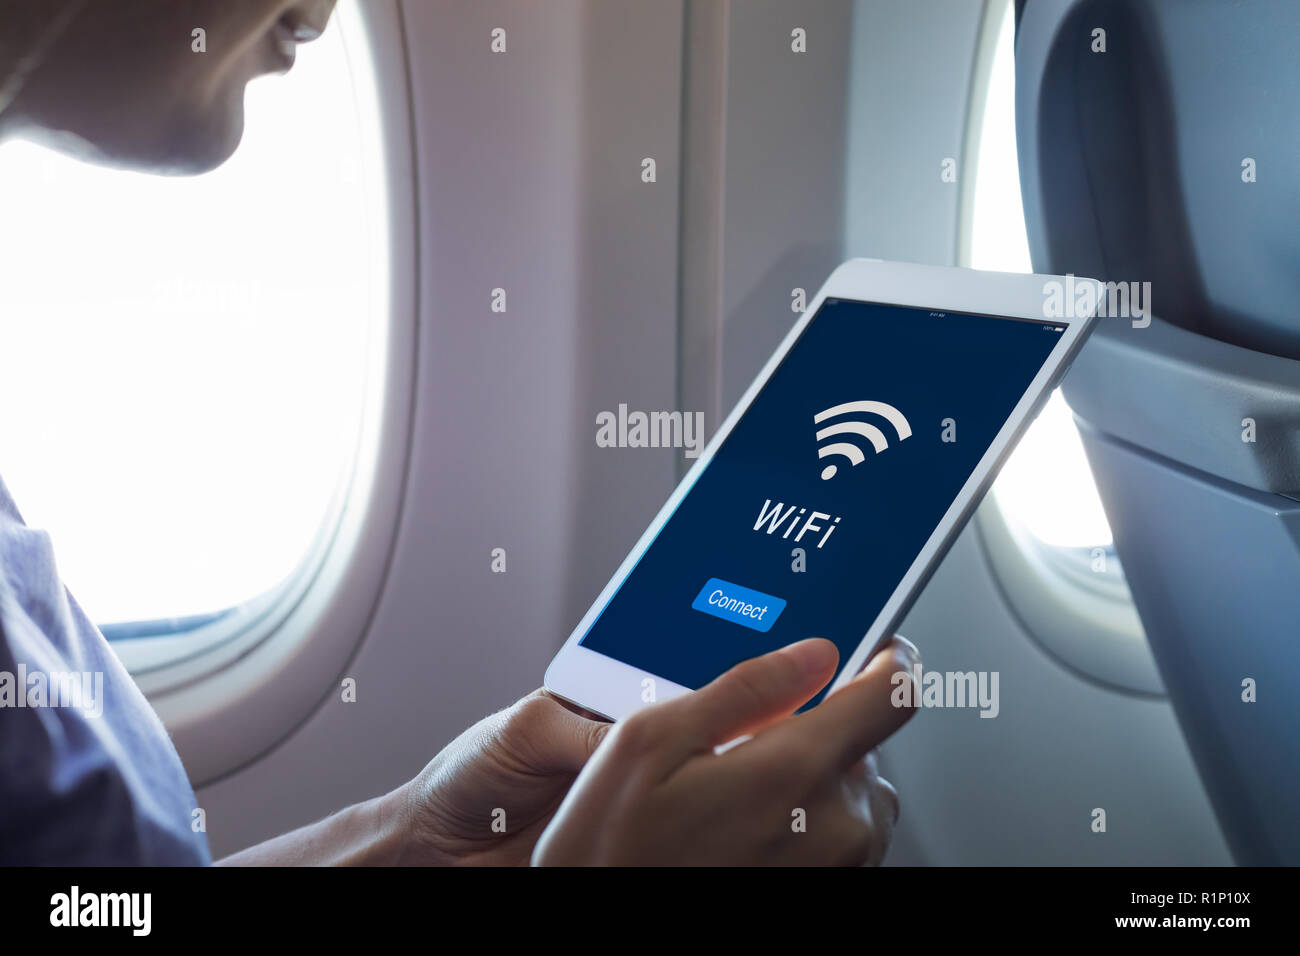 Wifi internet access in airplane during flight, passenger using tablet computer to connect to wireless network technology onboard to read email while  Stock Photo